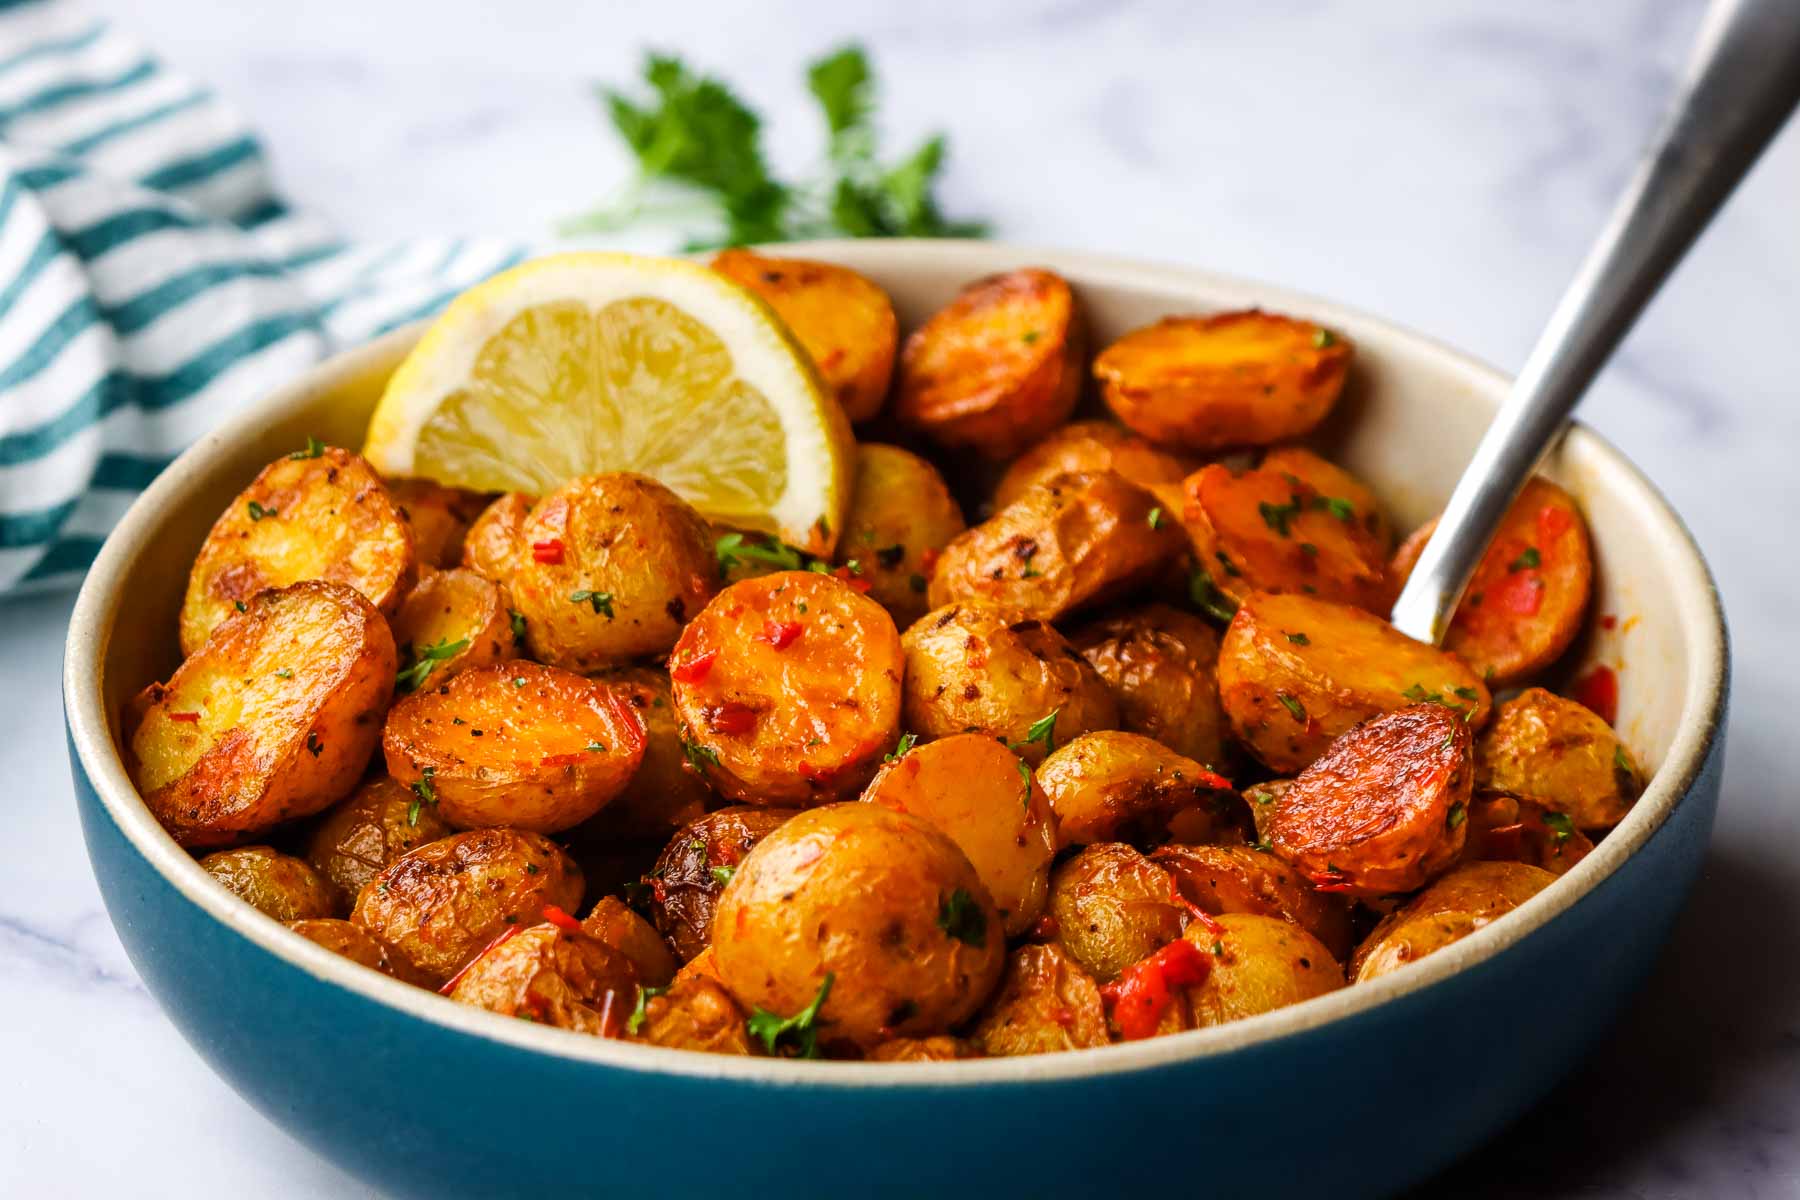 A bowl of roasted harissa potatoes garnished with a lemon wedge.